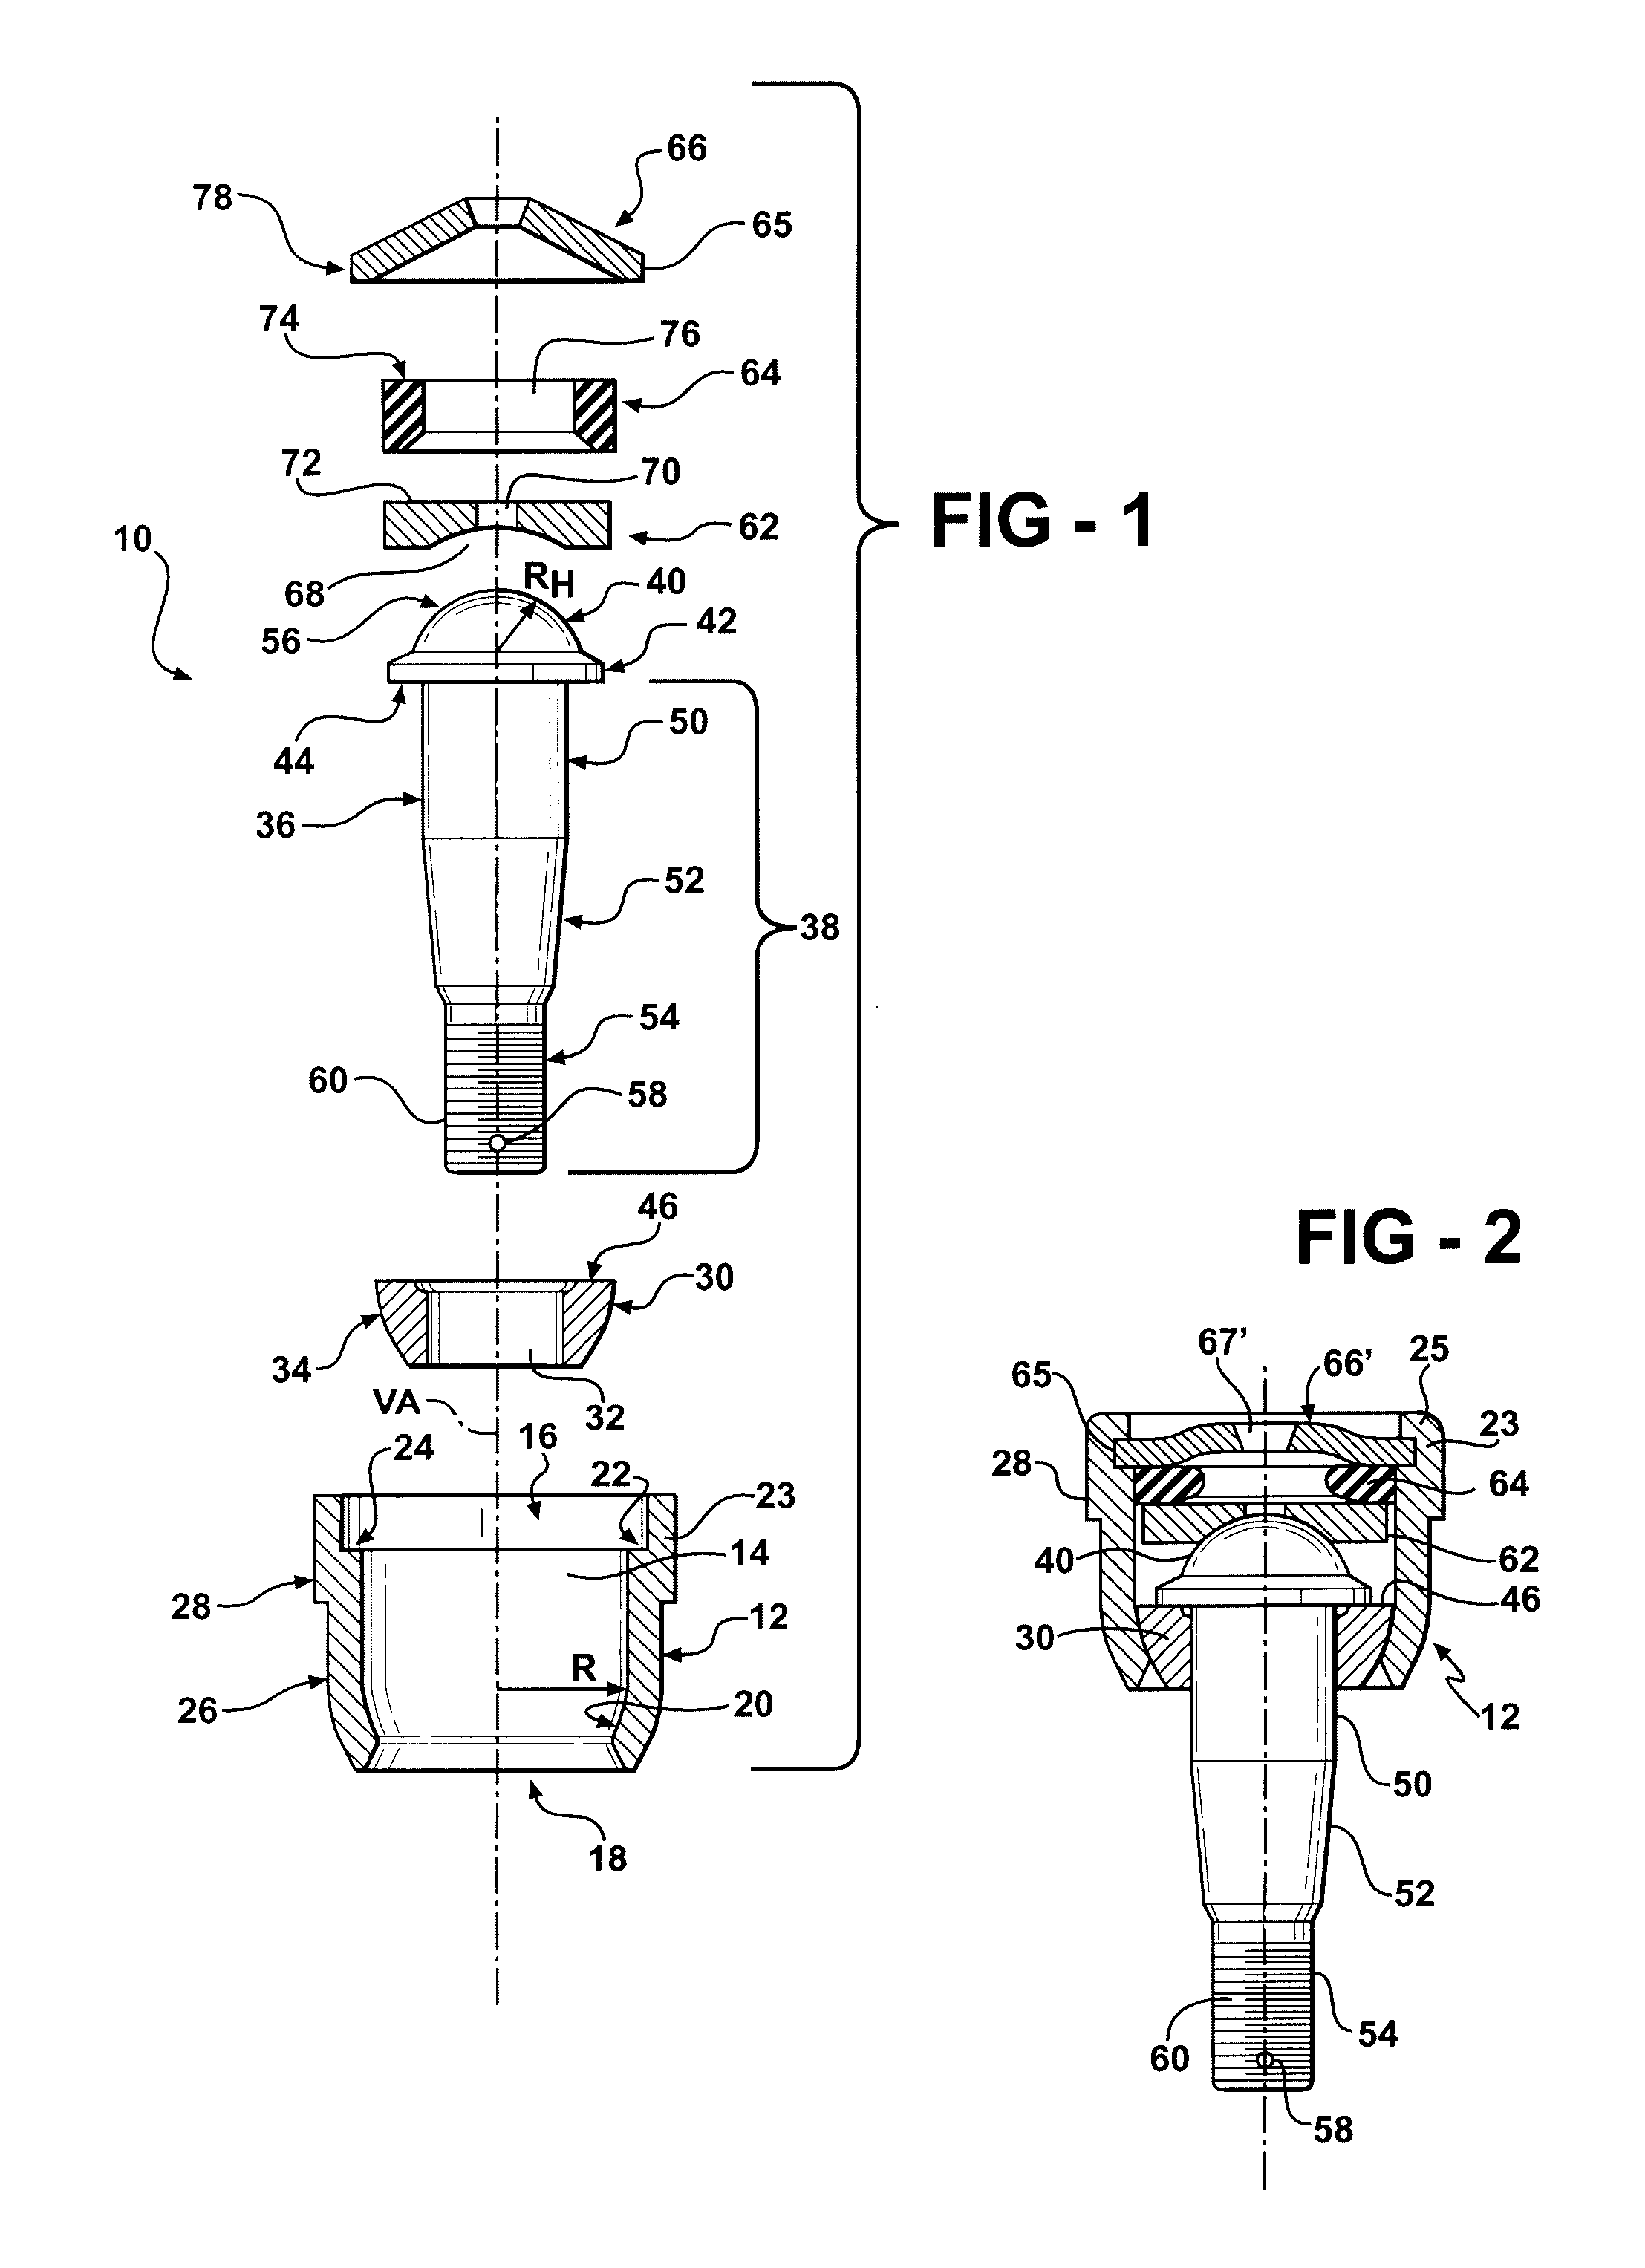 Method and apparatus for clearance adjusting cover plate closure